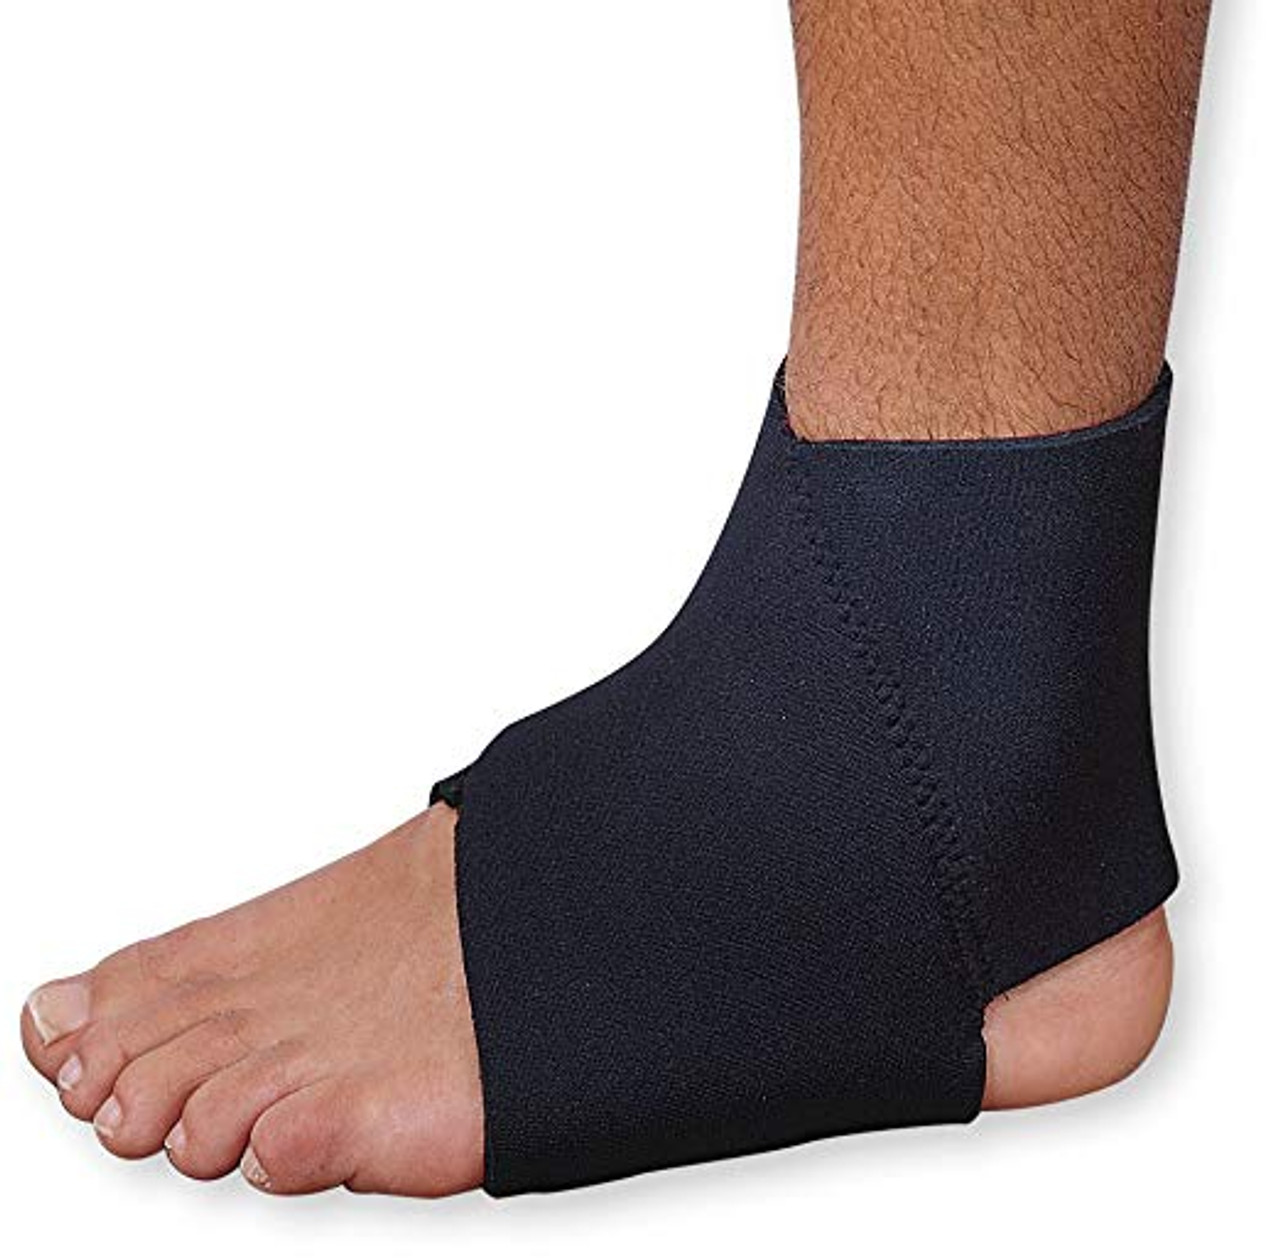 Neoprene Ankle Support - Large (2371)